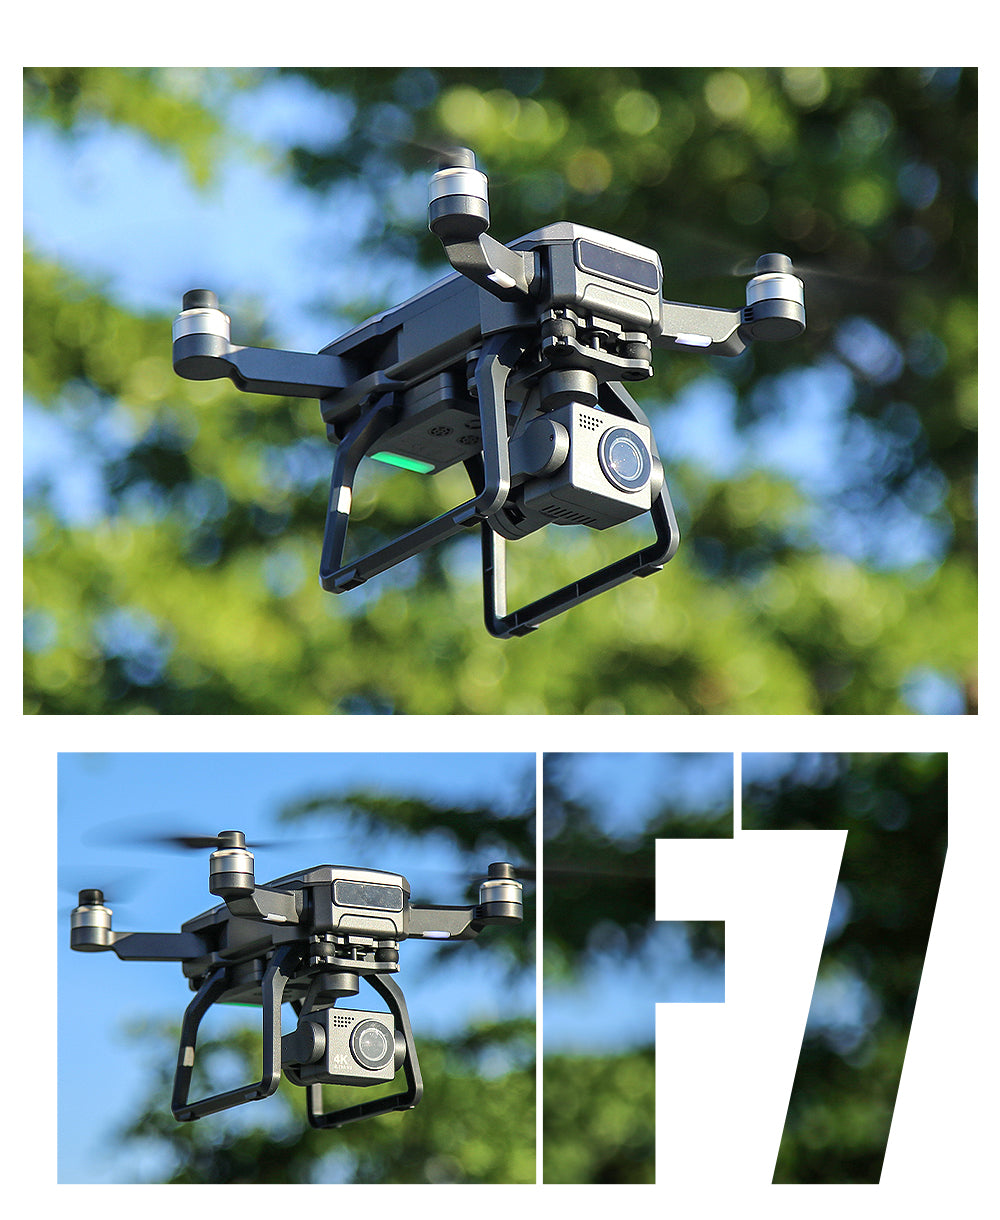 SJRC F7 PRO Drone Review